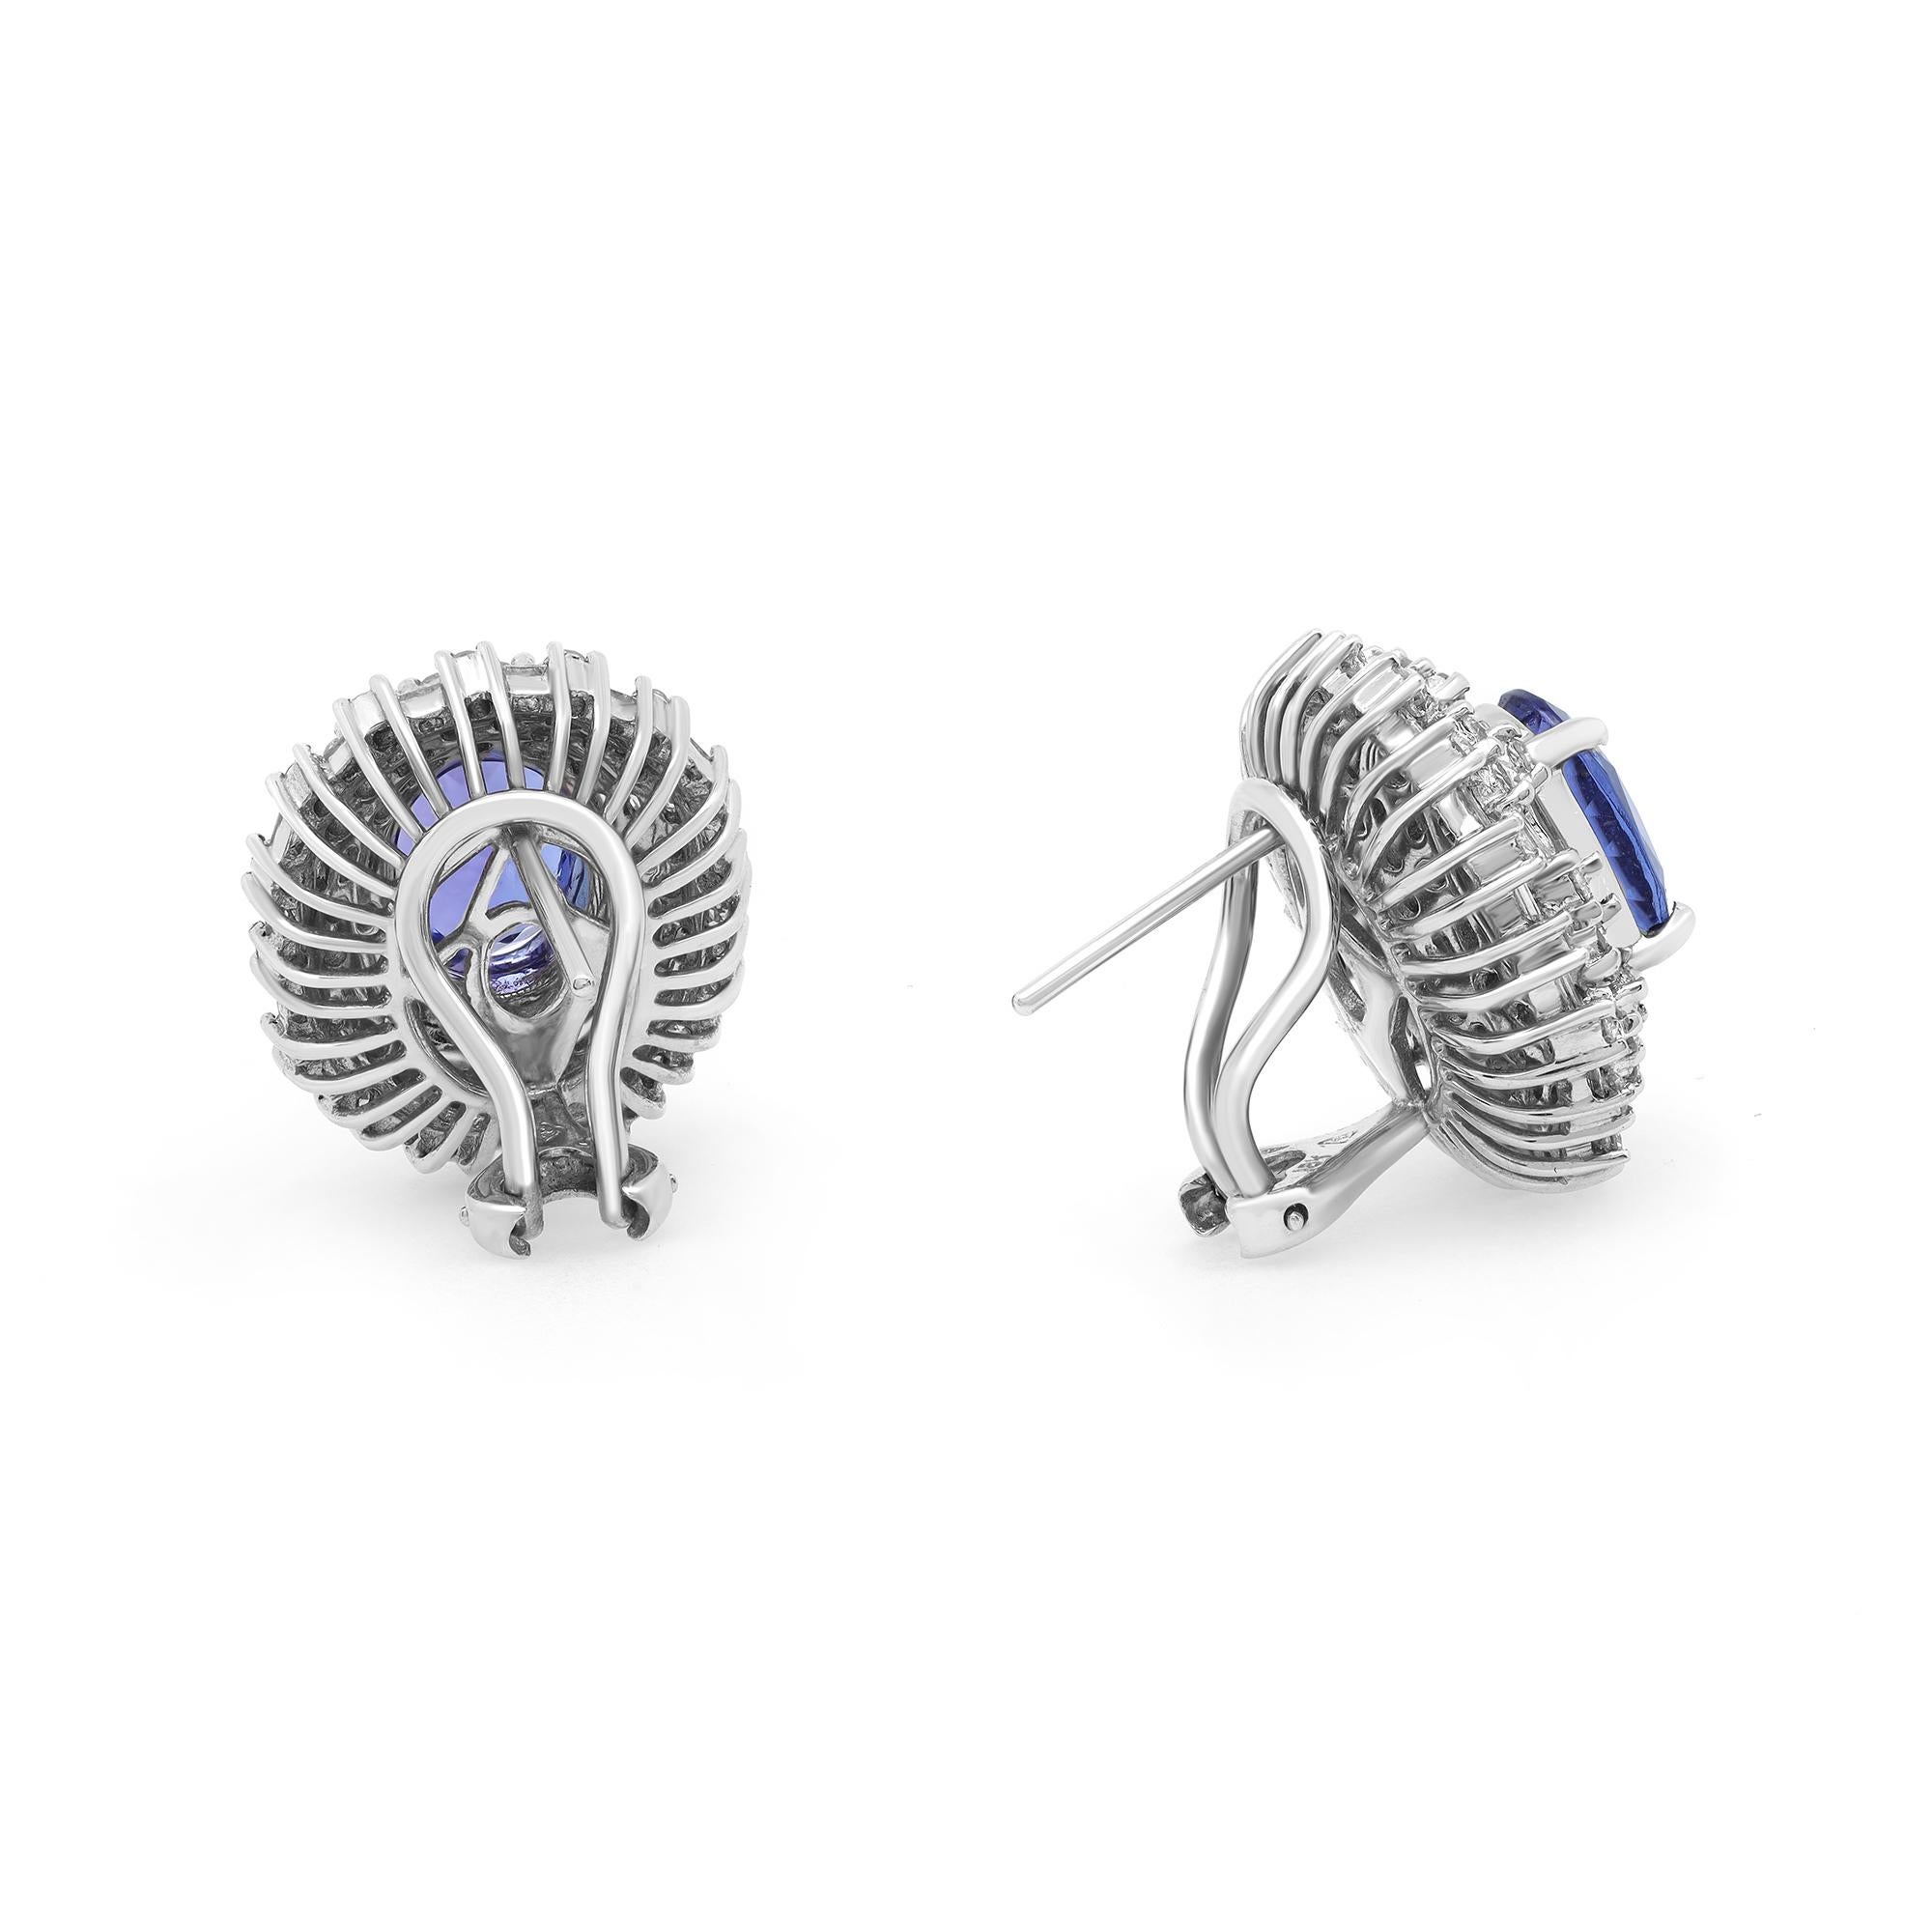 These beautiful earrings feature center oval shaped Tanzanite with baguette and round cut diamonds in prong setting forming a perfect oval. The diamonds are delicately set in fine 18k white gold. A large backing provides extra pledge and comfort by